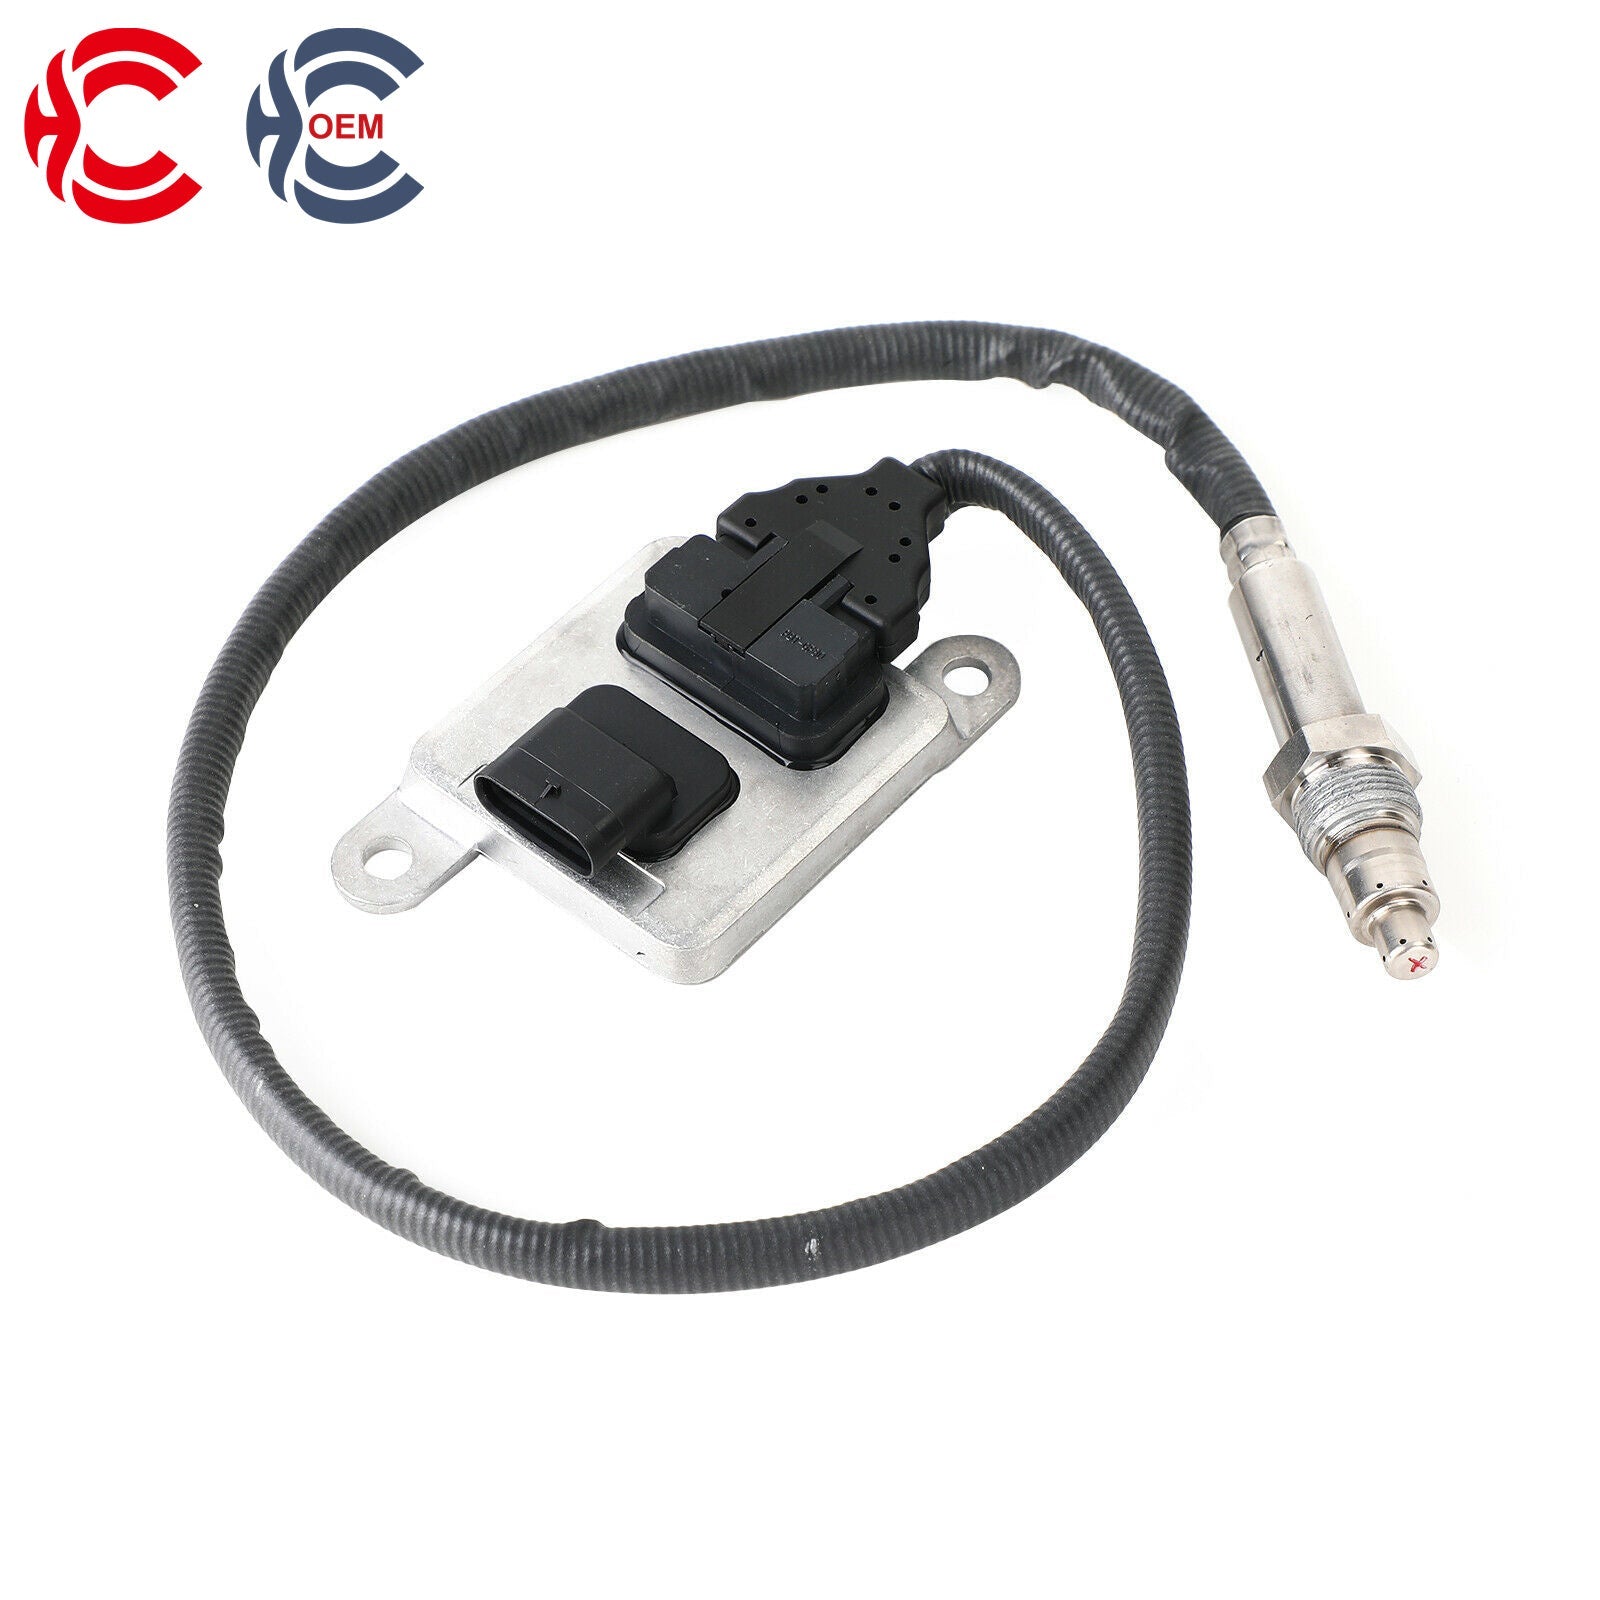 OEM: 89824-65062 Material: ABS metal Color: black silver Origin: Made in China Weight: 400g Packing List: 1*  Nitrogen oxide sensor NOx  More Service We can provide OEM Manufacturing service We can Be your one-step solution for Auto Parts We can provide technical scheme for you  Feel Free to Contact Us, We will get back to you as soon as possible.